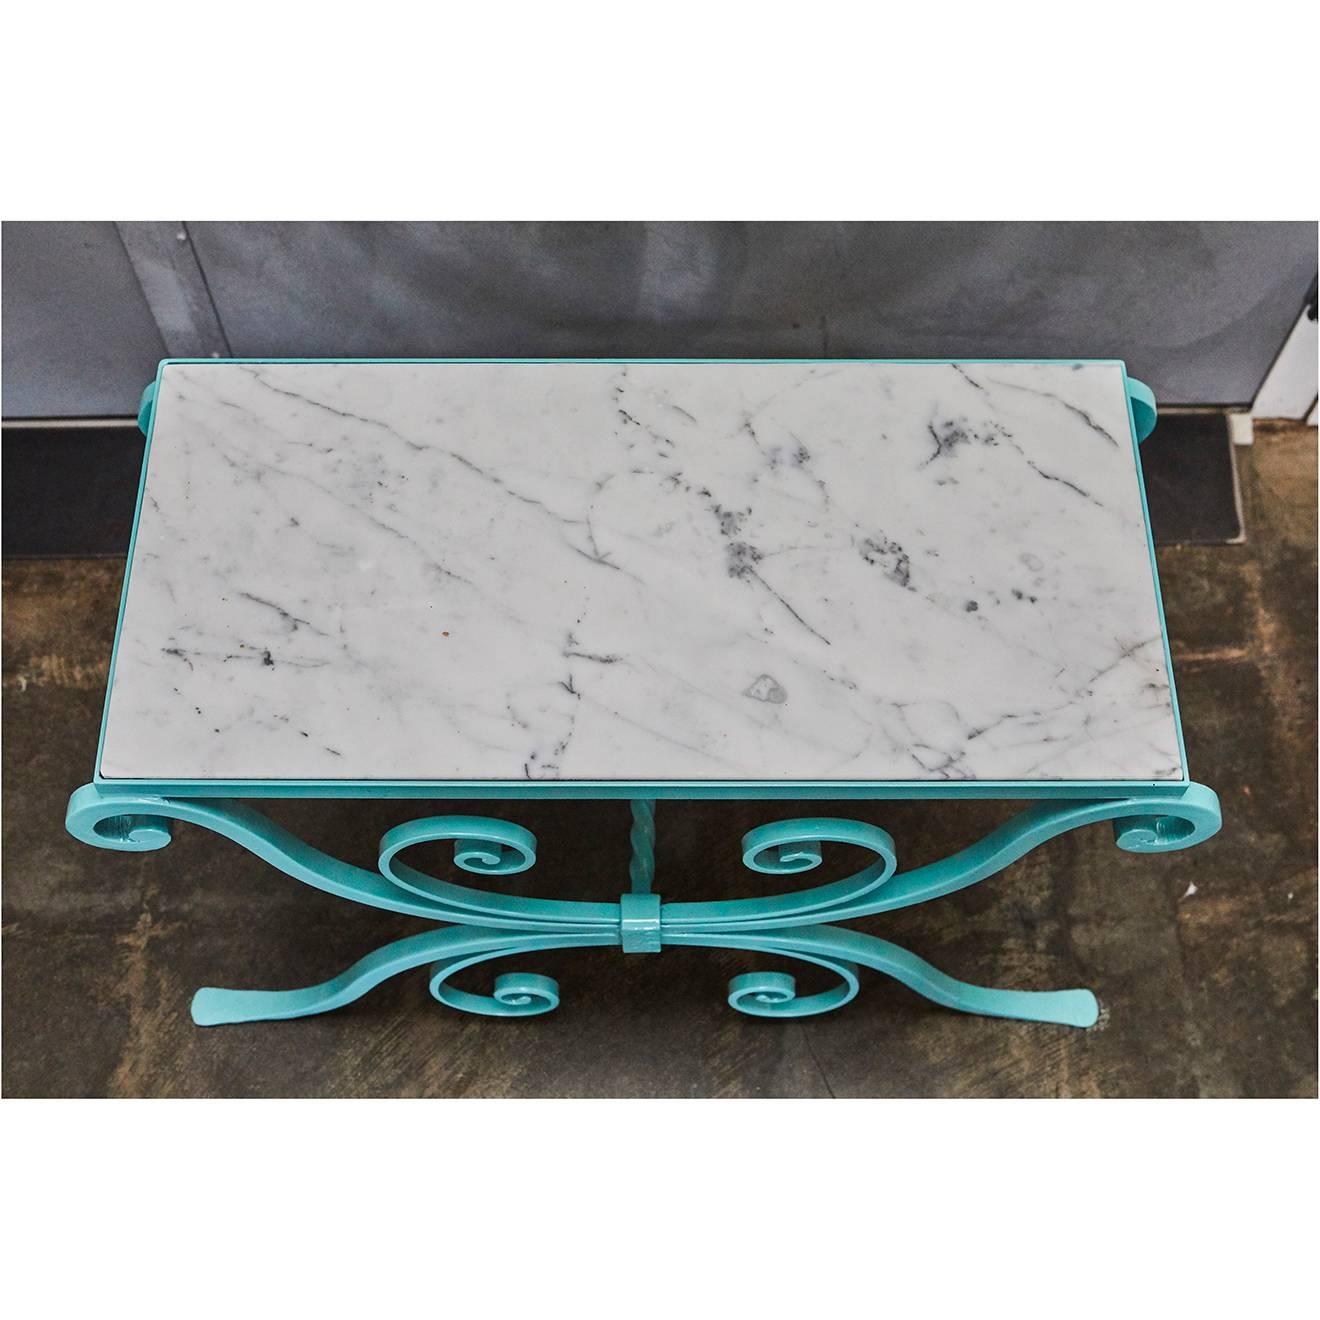 The wrought iron base of this garden table has been powder coated in a nice bright turquoise color. The small table has a newly cut marble top.


